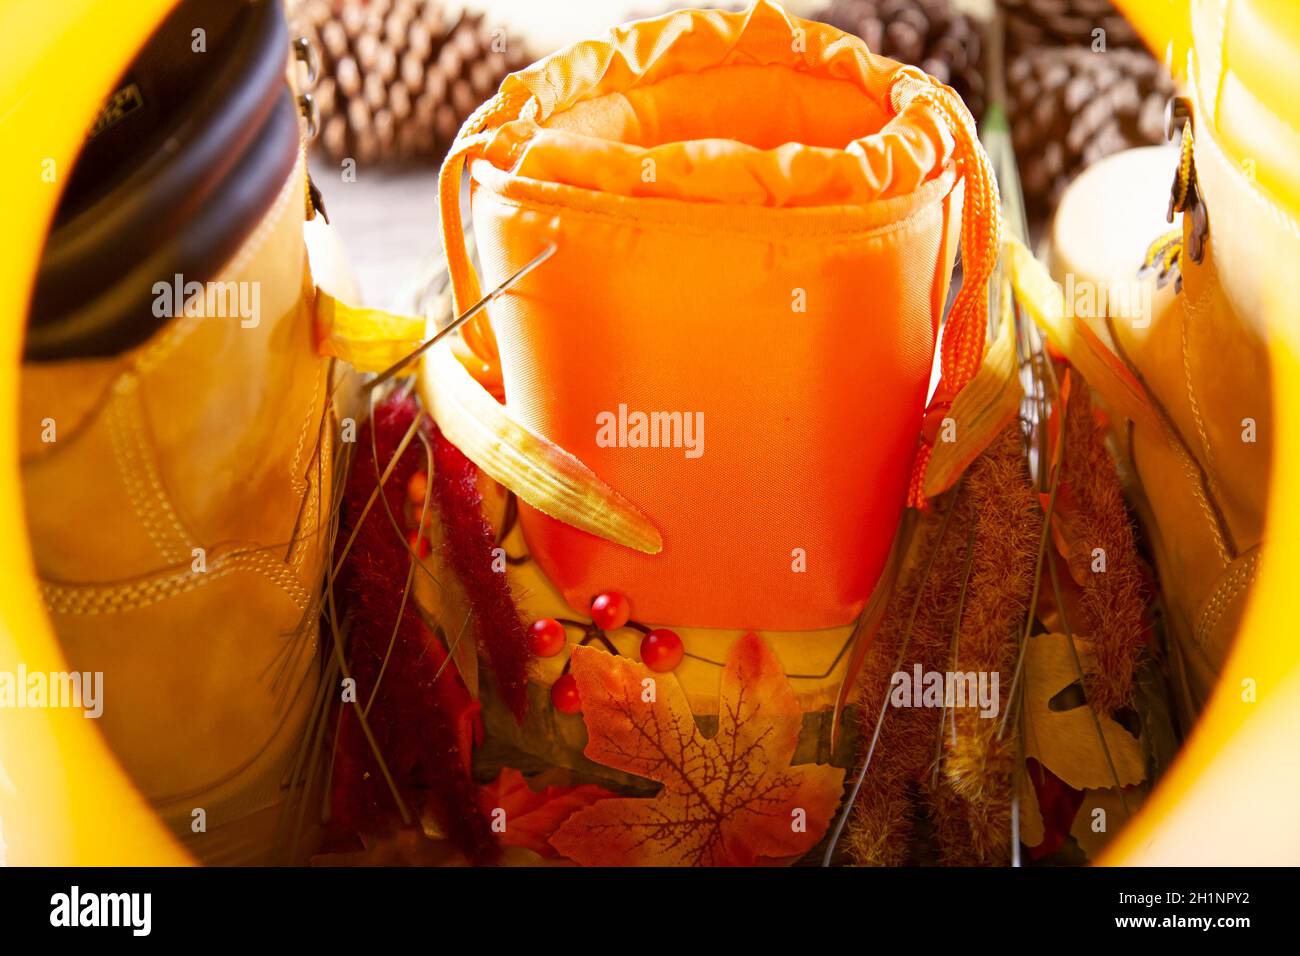 A hunter orange pouch on a wooden slab next to orange and red berries and leaves between boots with pinecones in the background Stock Photo